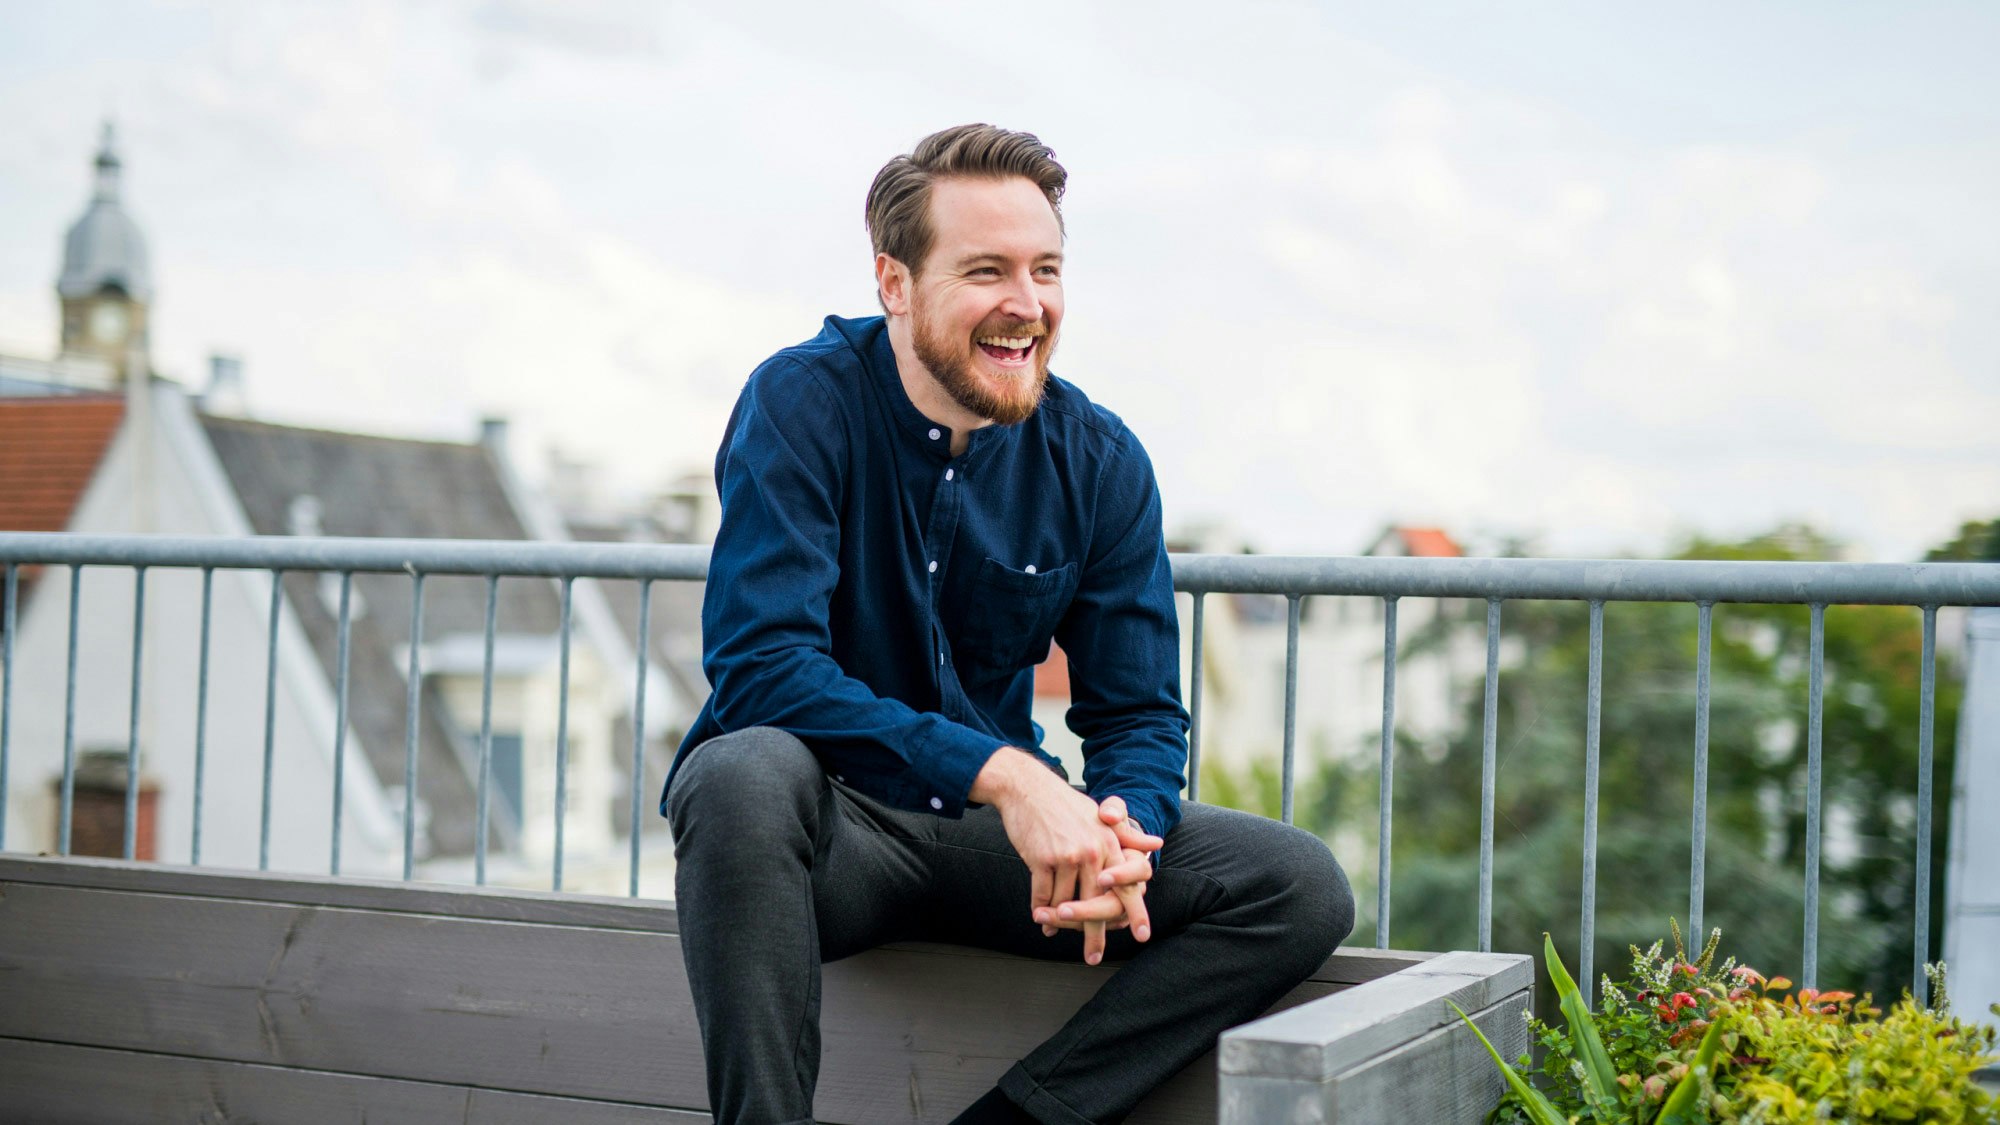 Kevin Krifter laughing, sitting on a roof terrace bench.